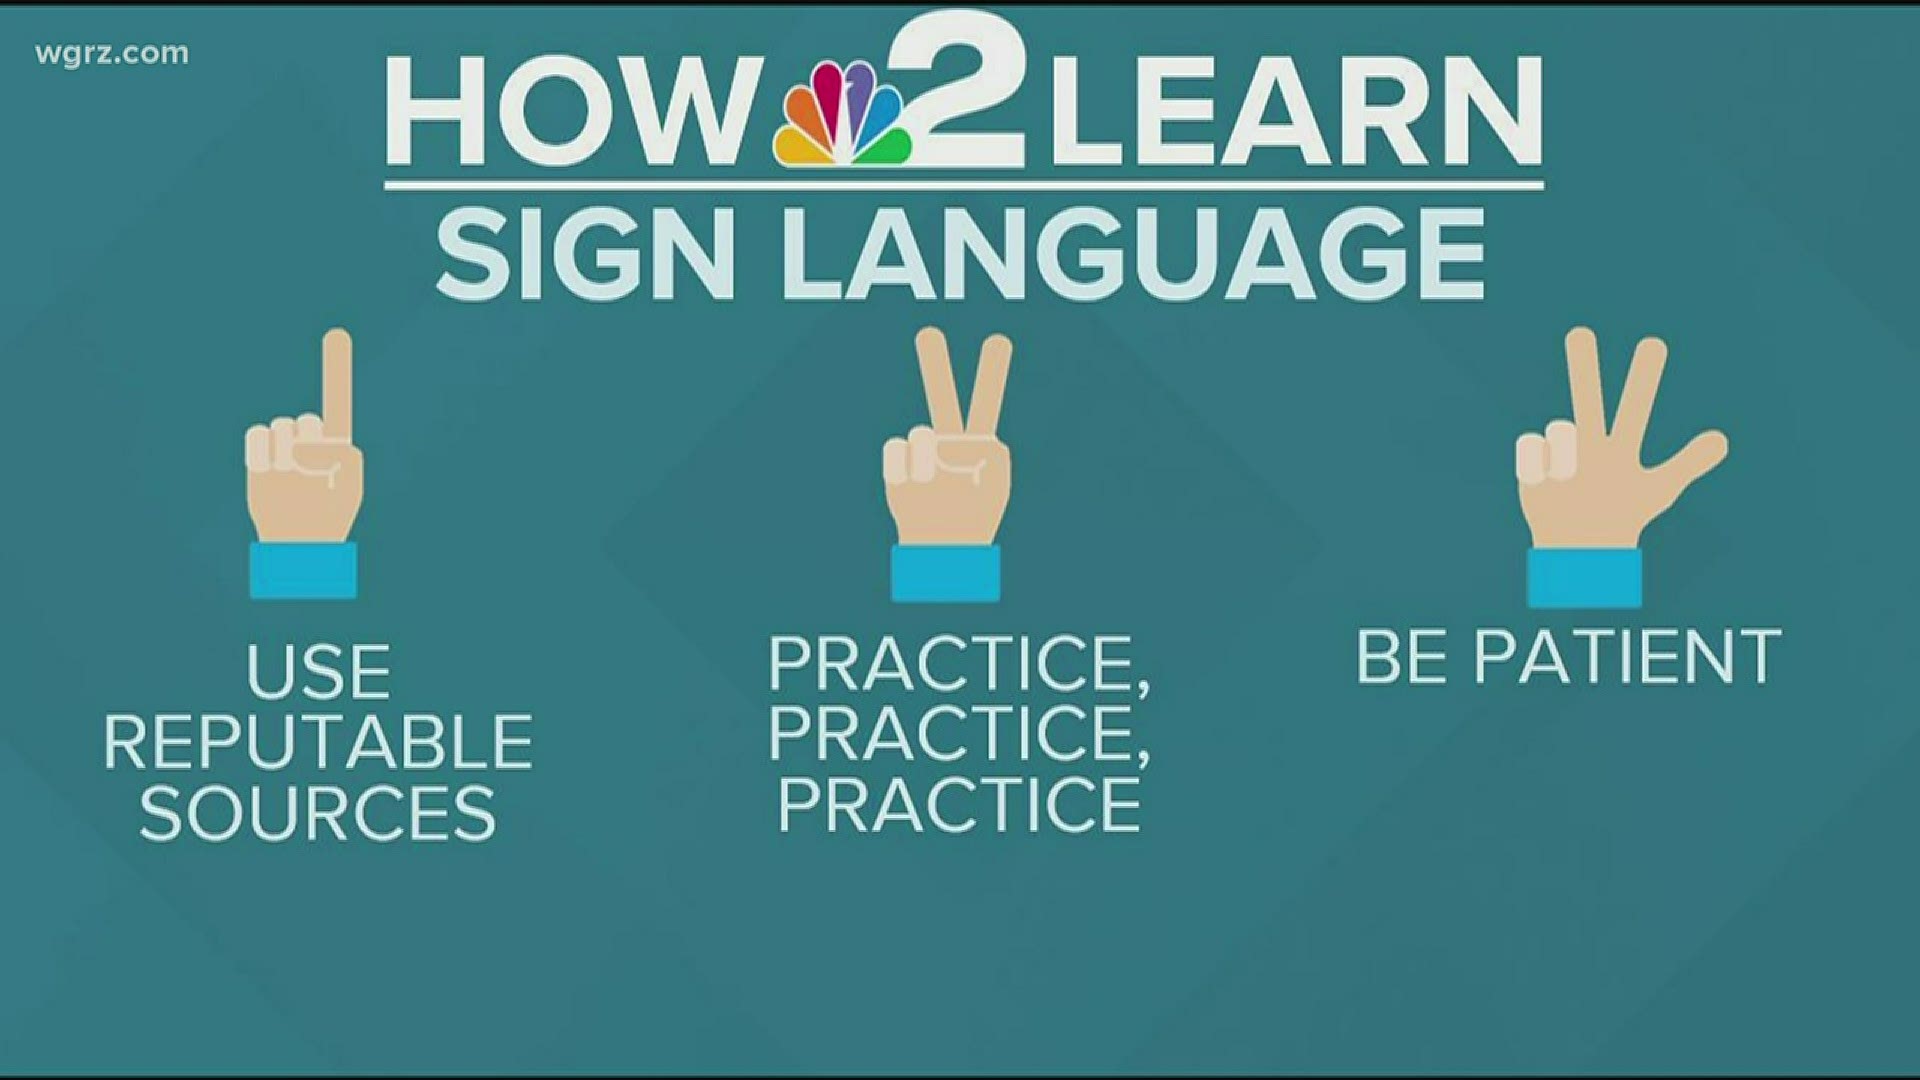 Many 2 On Your Side viewers told us they were interested in learning American Sign Language.